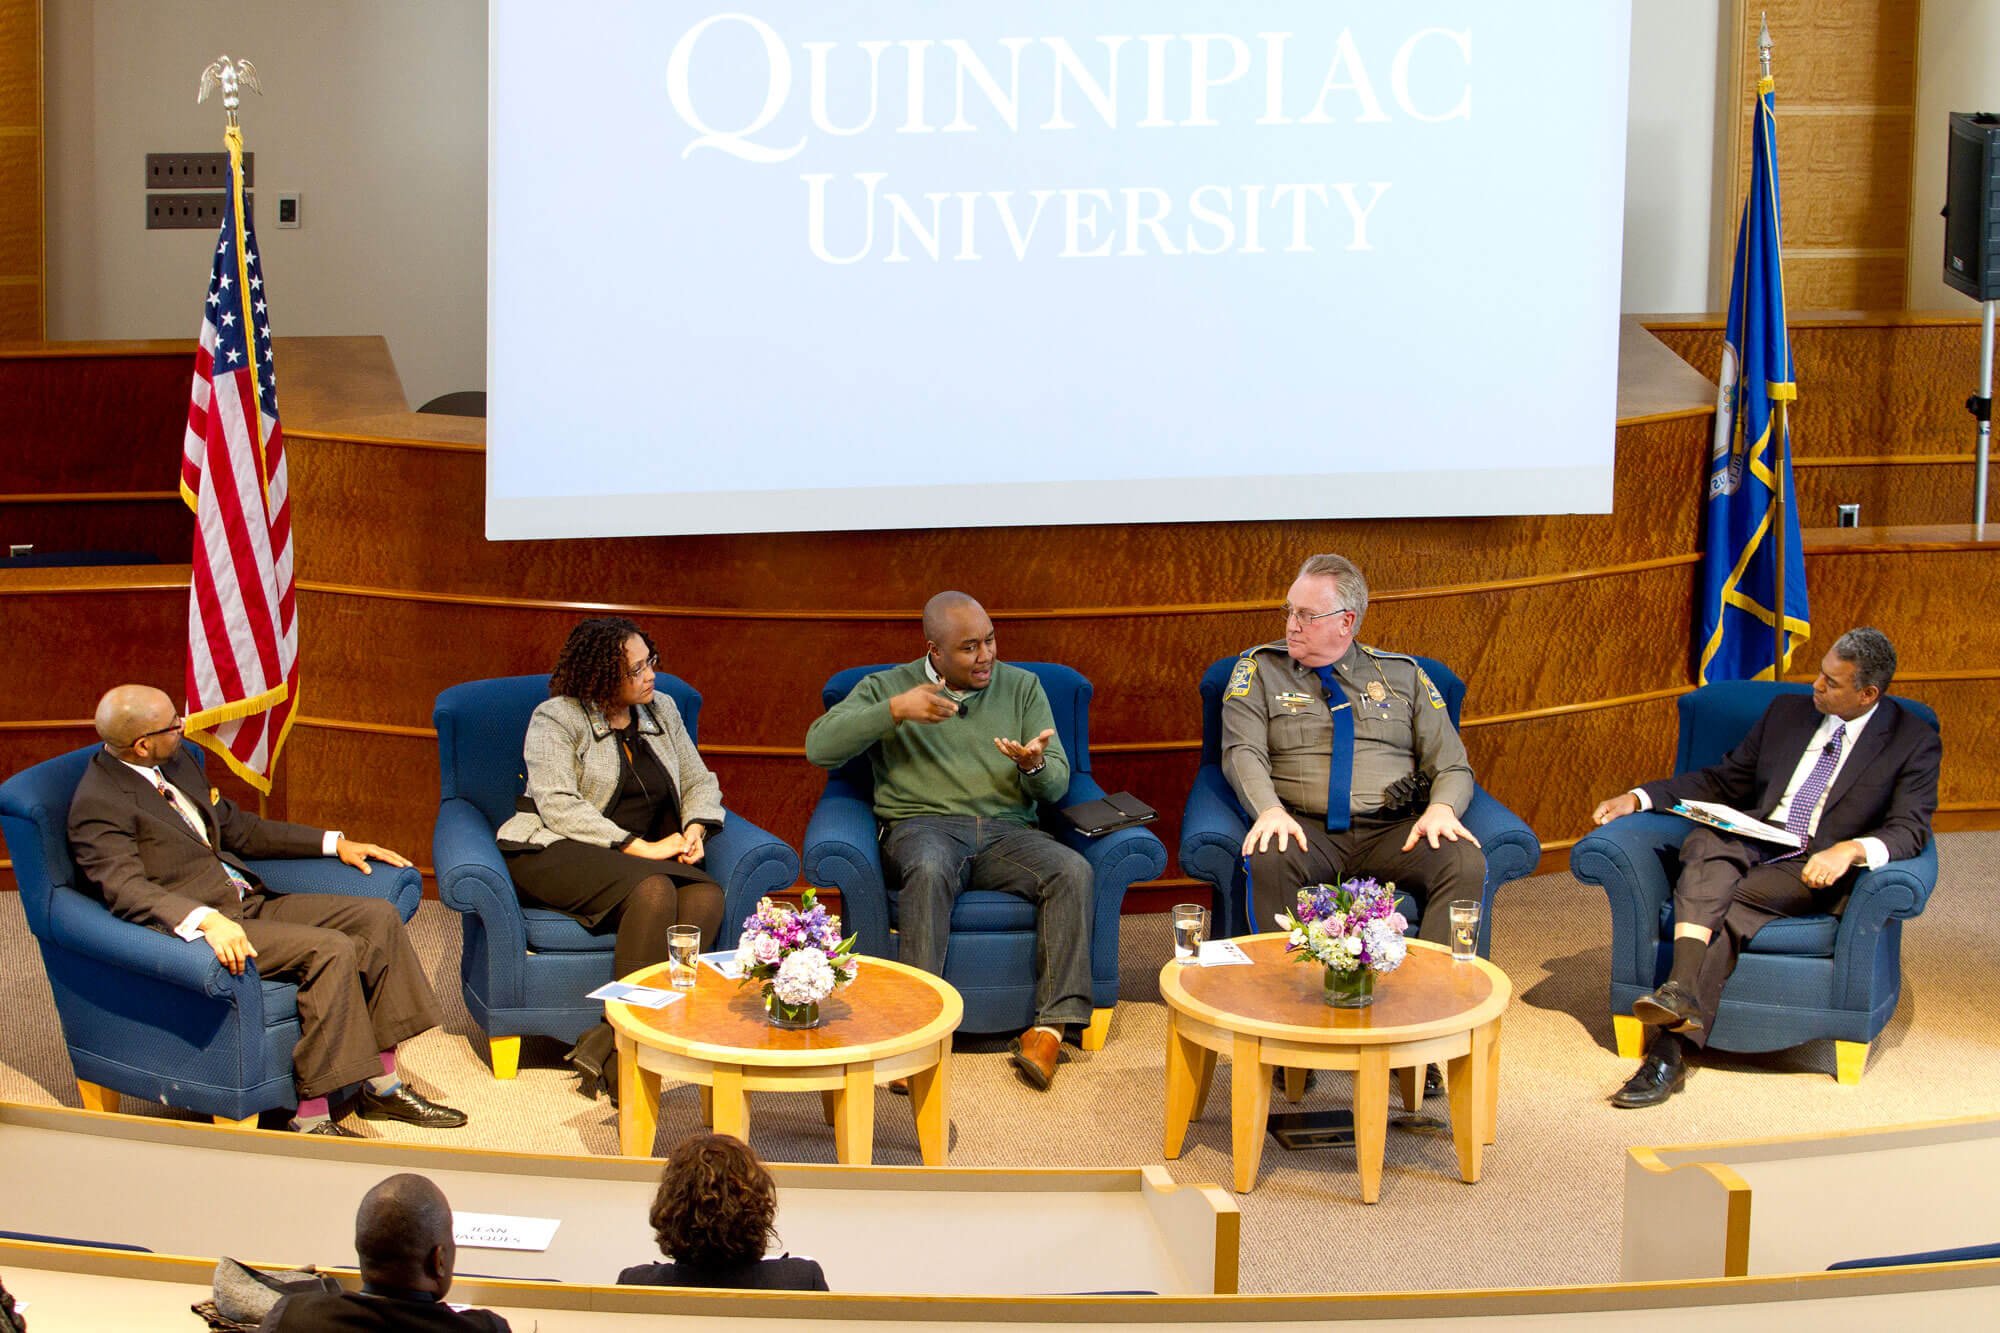 A panel of guests sit at the front of the room in arm chairs having a discussion